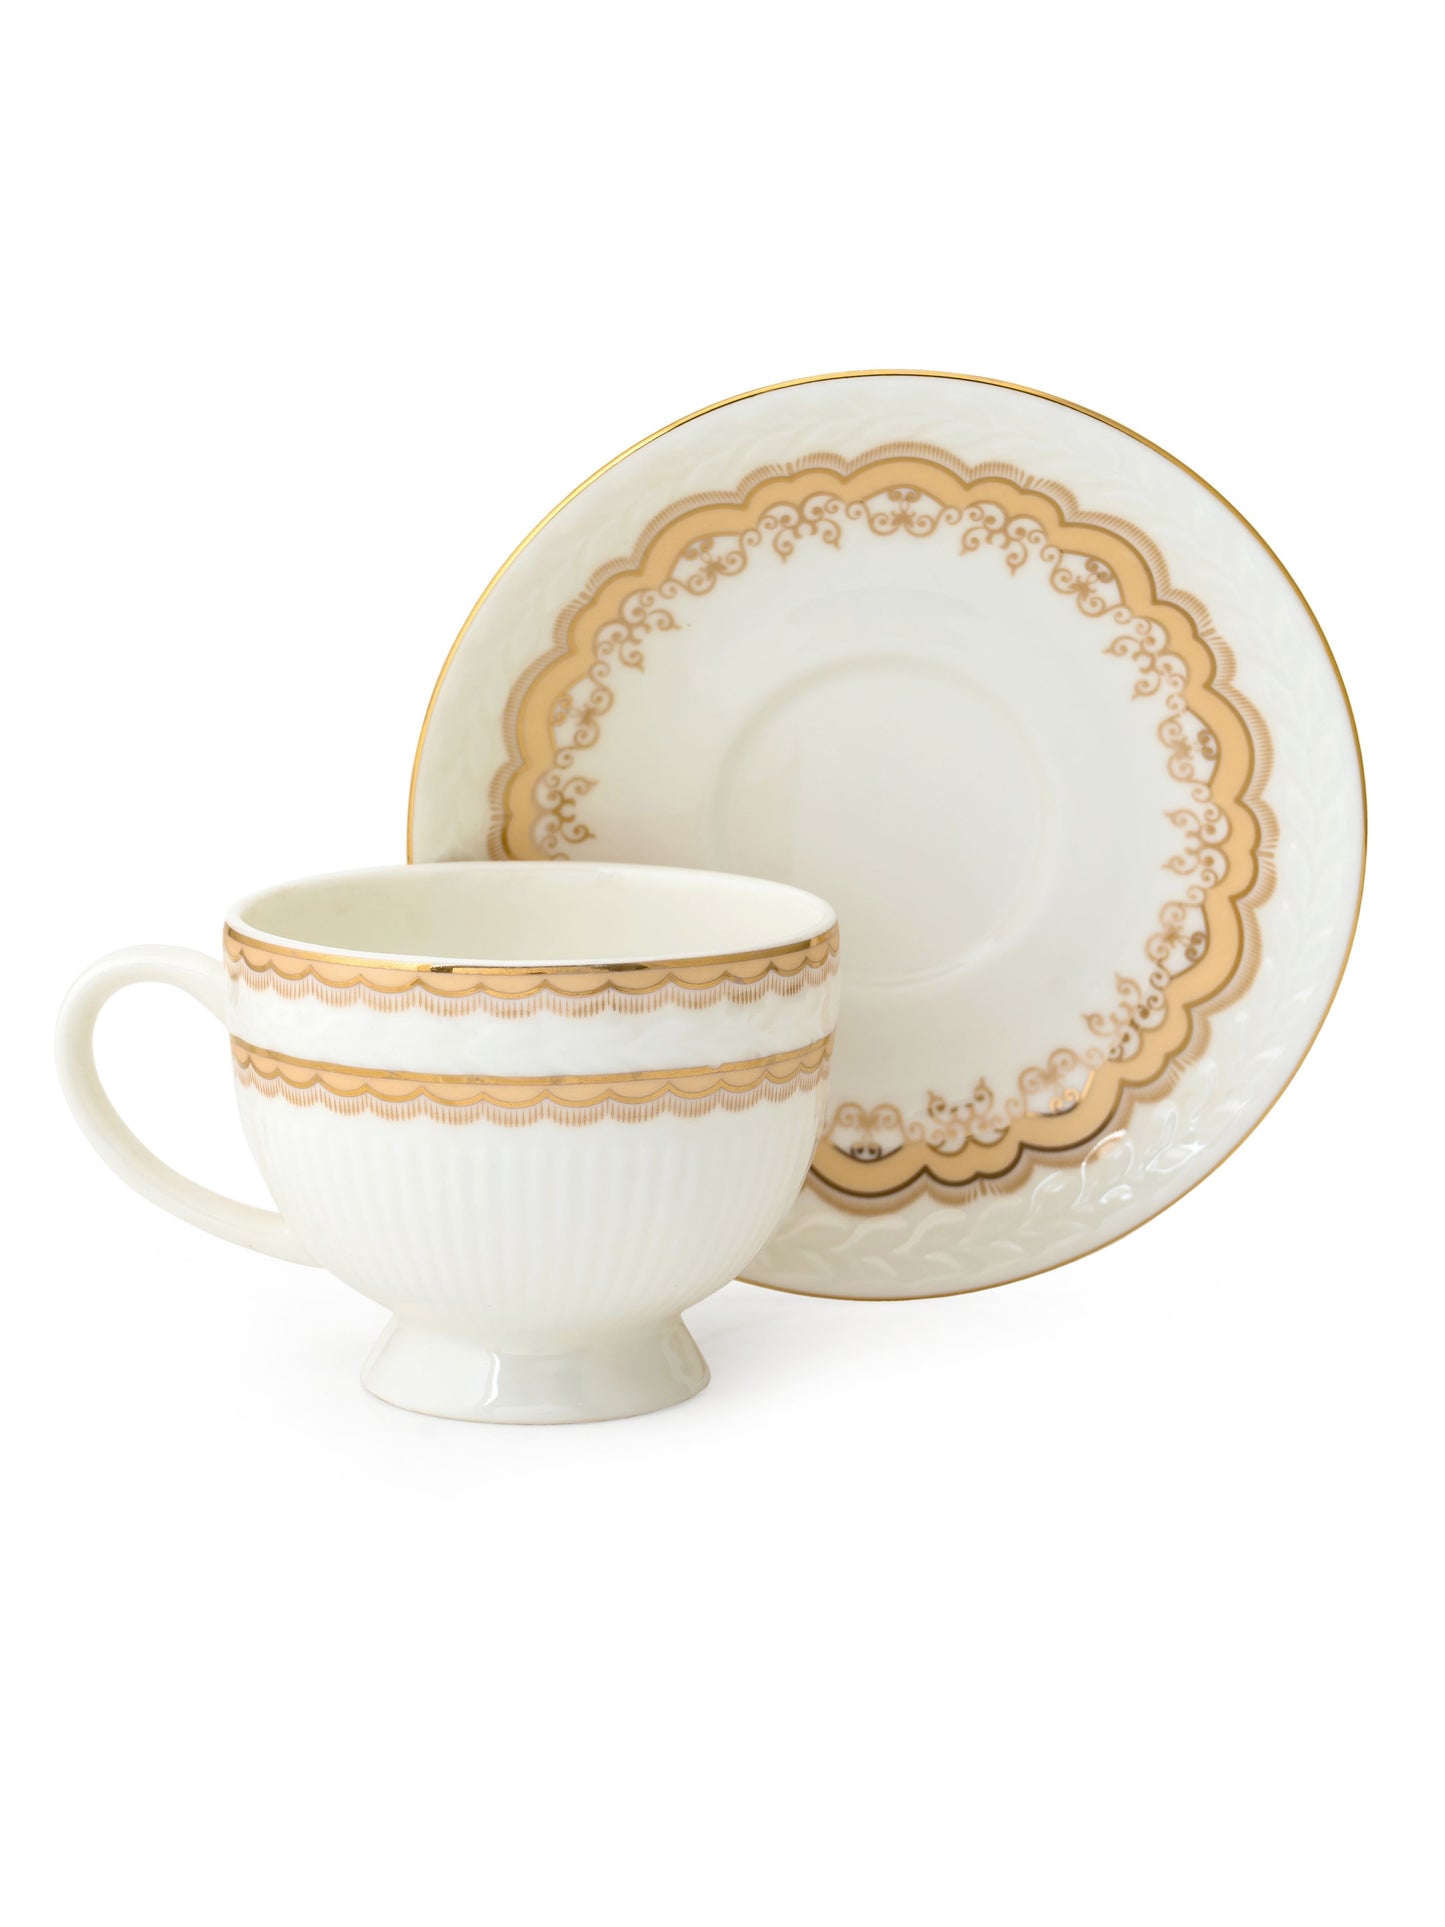 Snow Impression Cup & Saucer, 170 ml, Set of 12 (6 Cups + 6 Saucers) (1405)